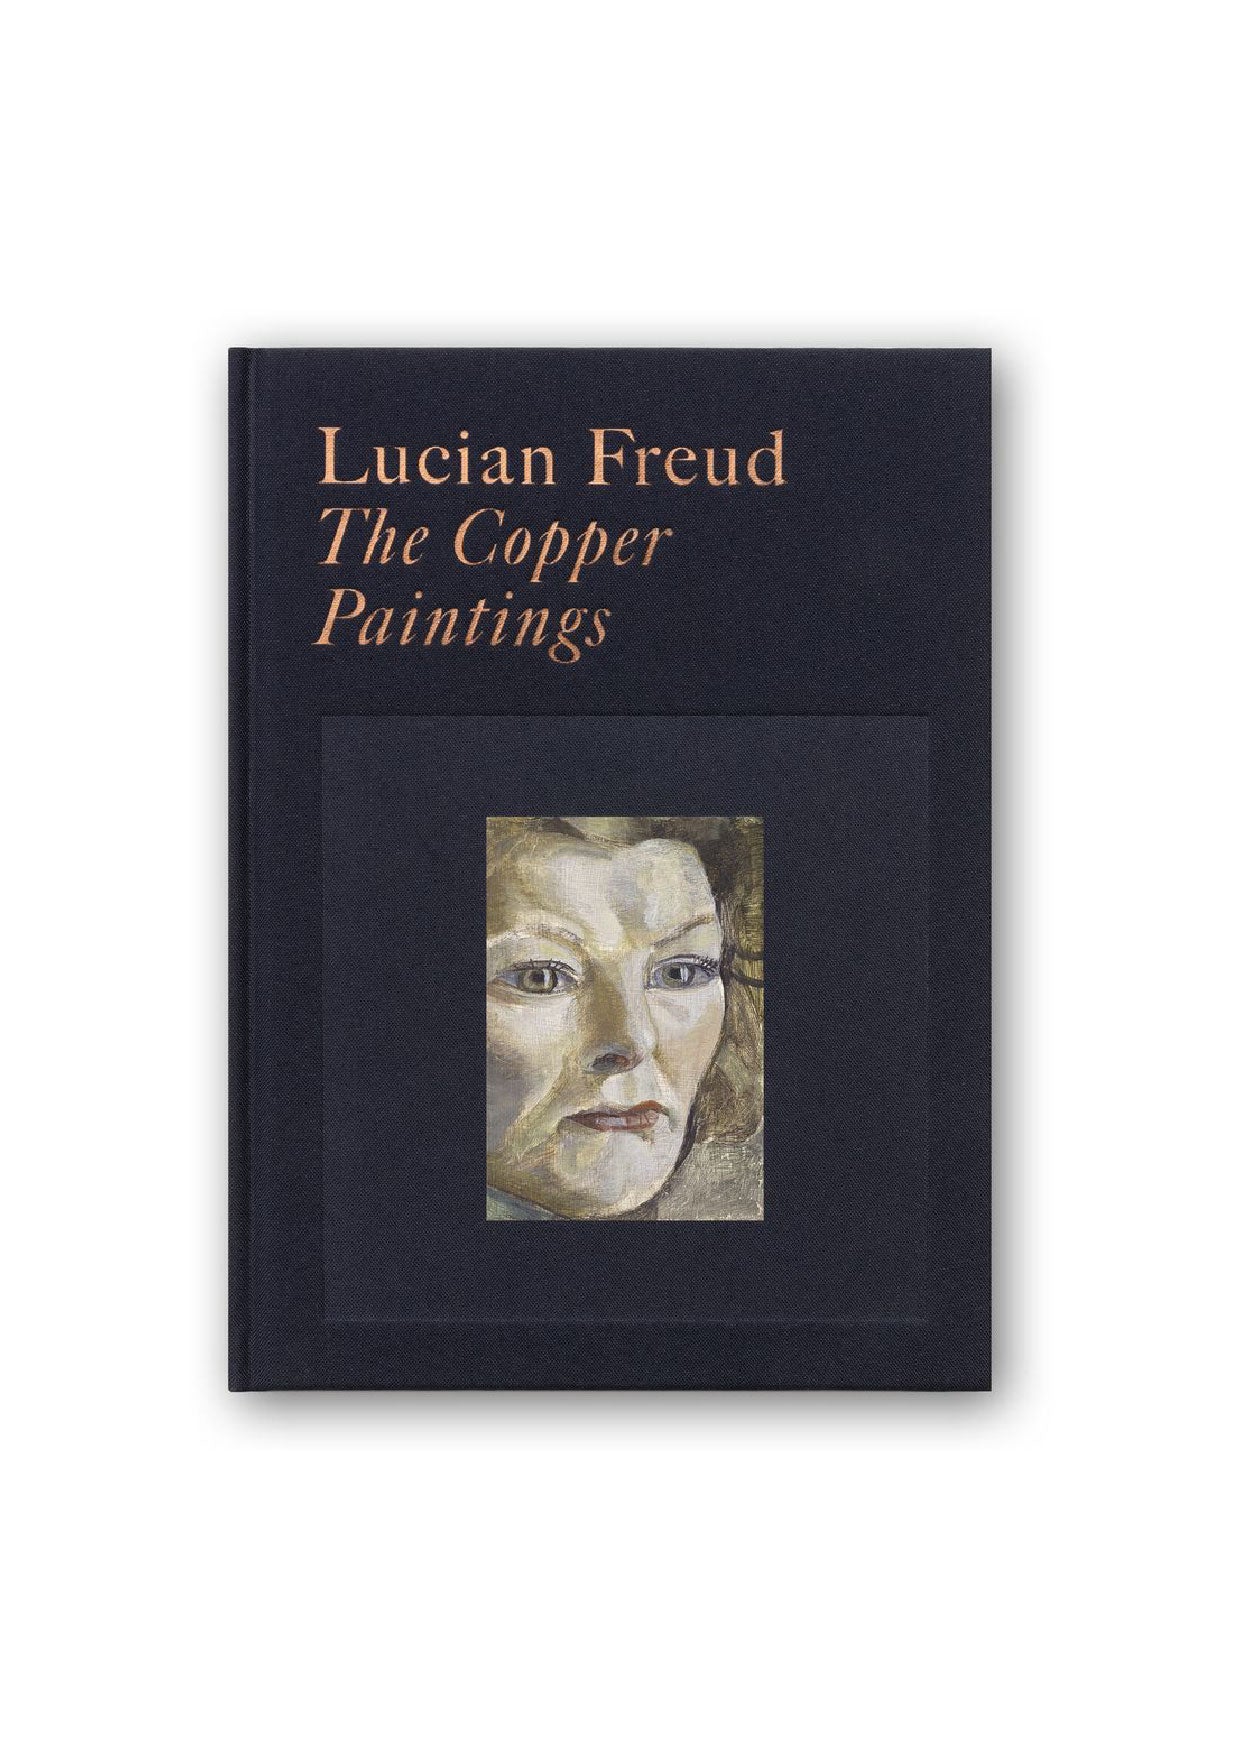 "Lucian Freud. The Copper Paintings"